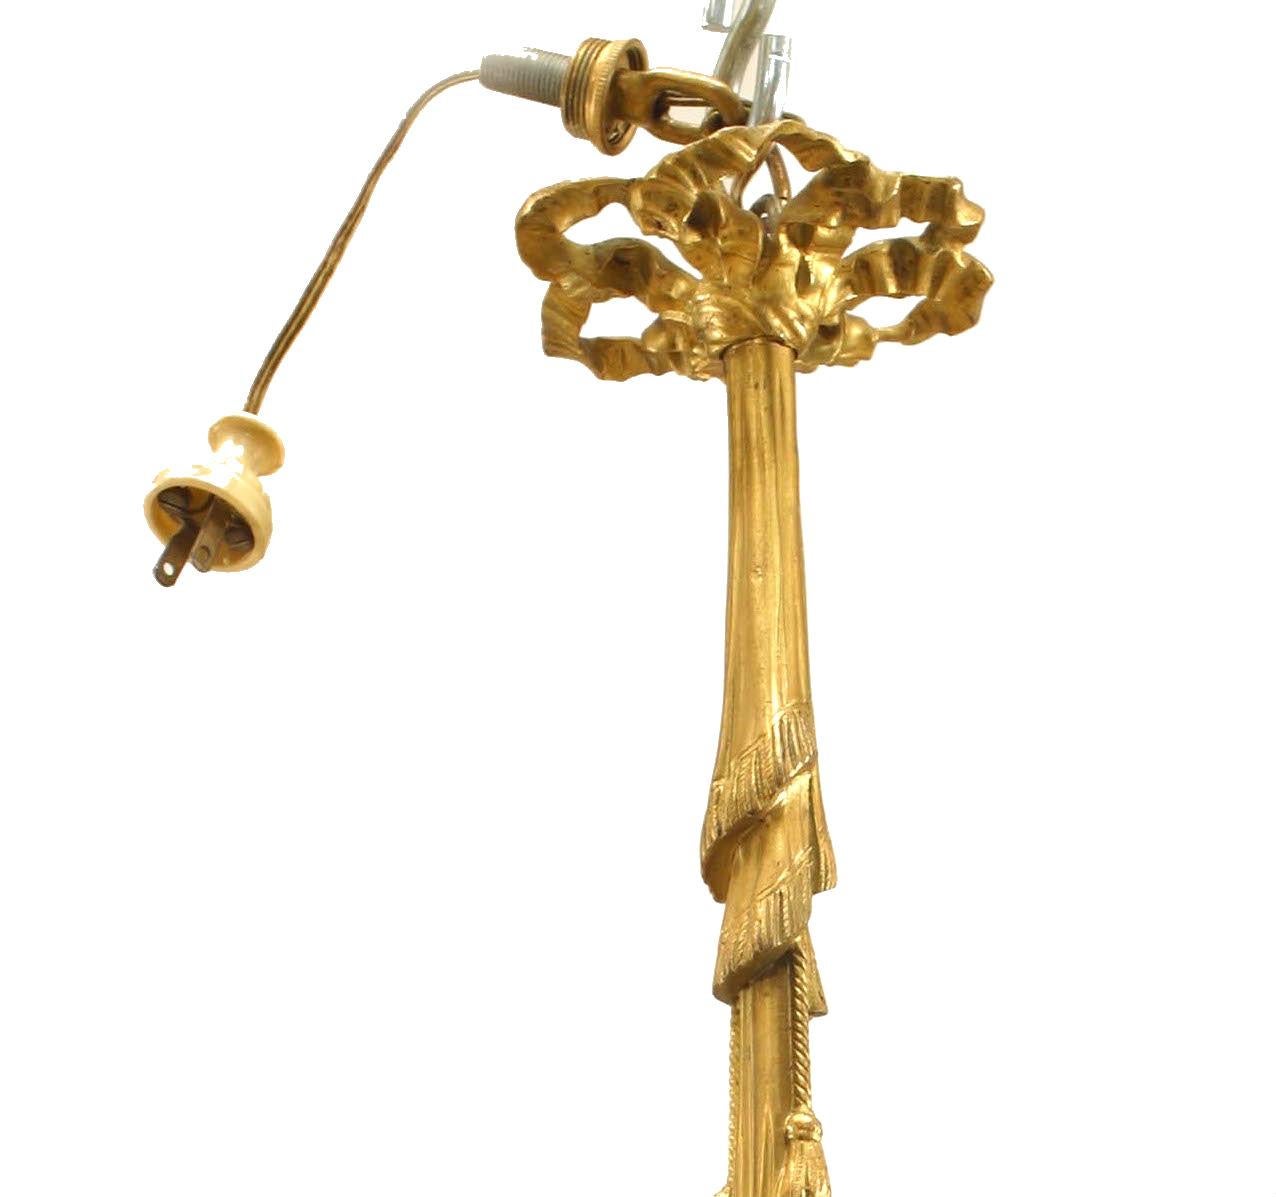 French Victorian gilt bronze chandelier with a drape form center shaft suspending a cupid holding 3 lights having glass flower shades.
